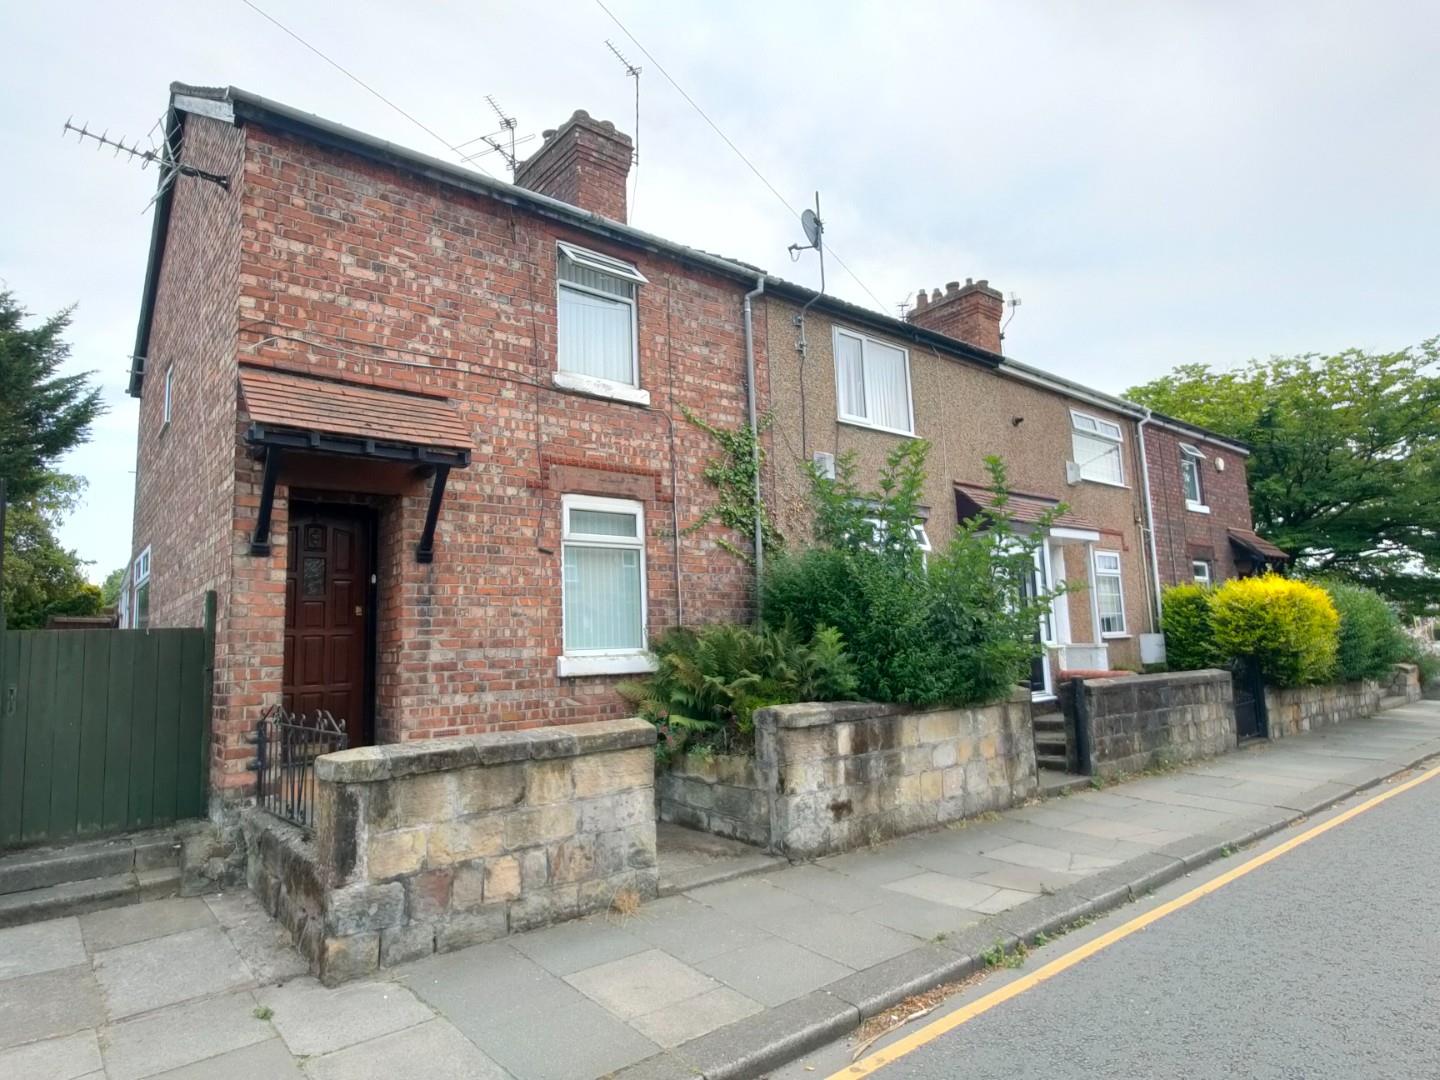 3 bedroom  Terraced Other for Rental in Wirral